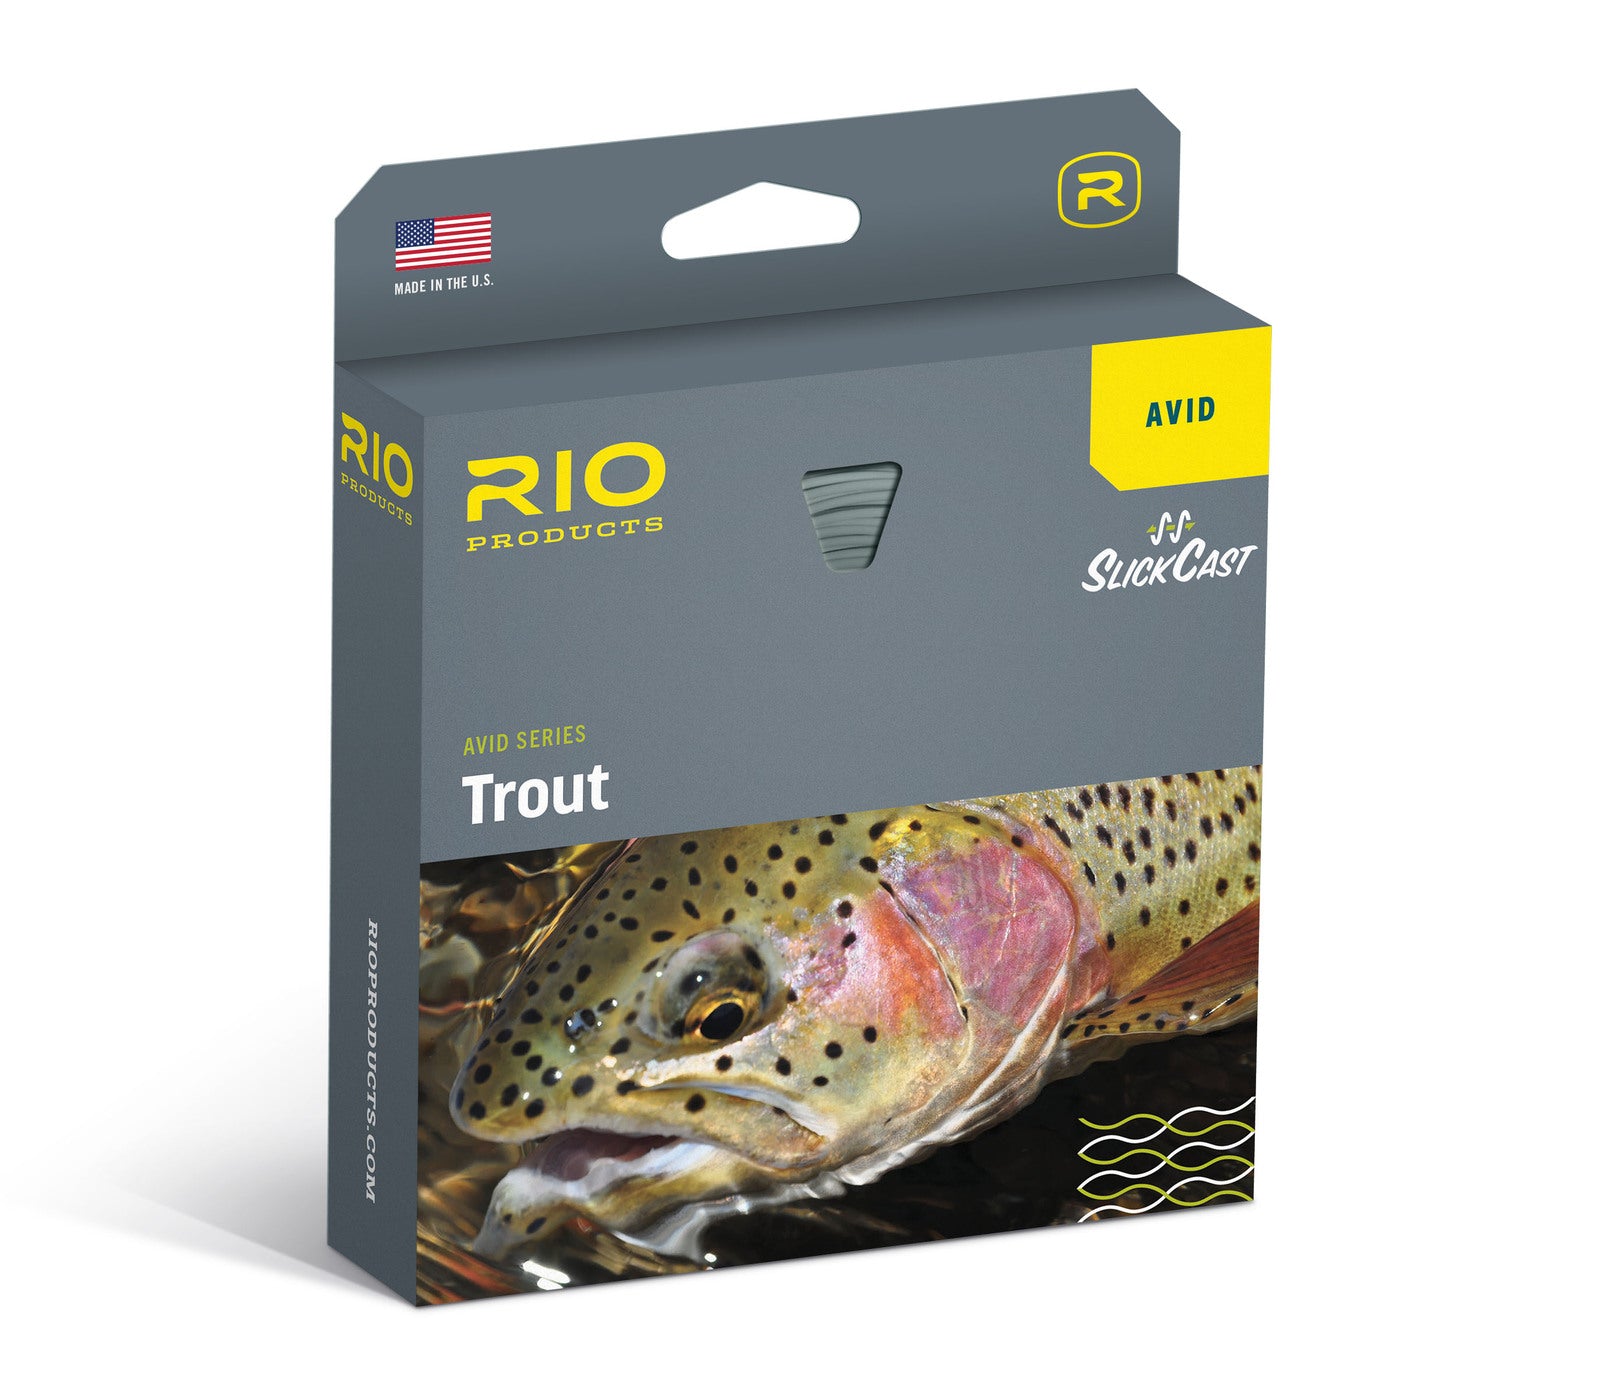 Camplab ·CAMPLAB· 500m Gold Spotted Fishing Line